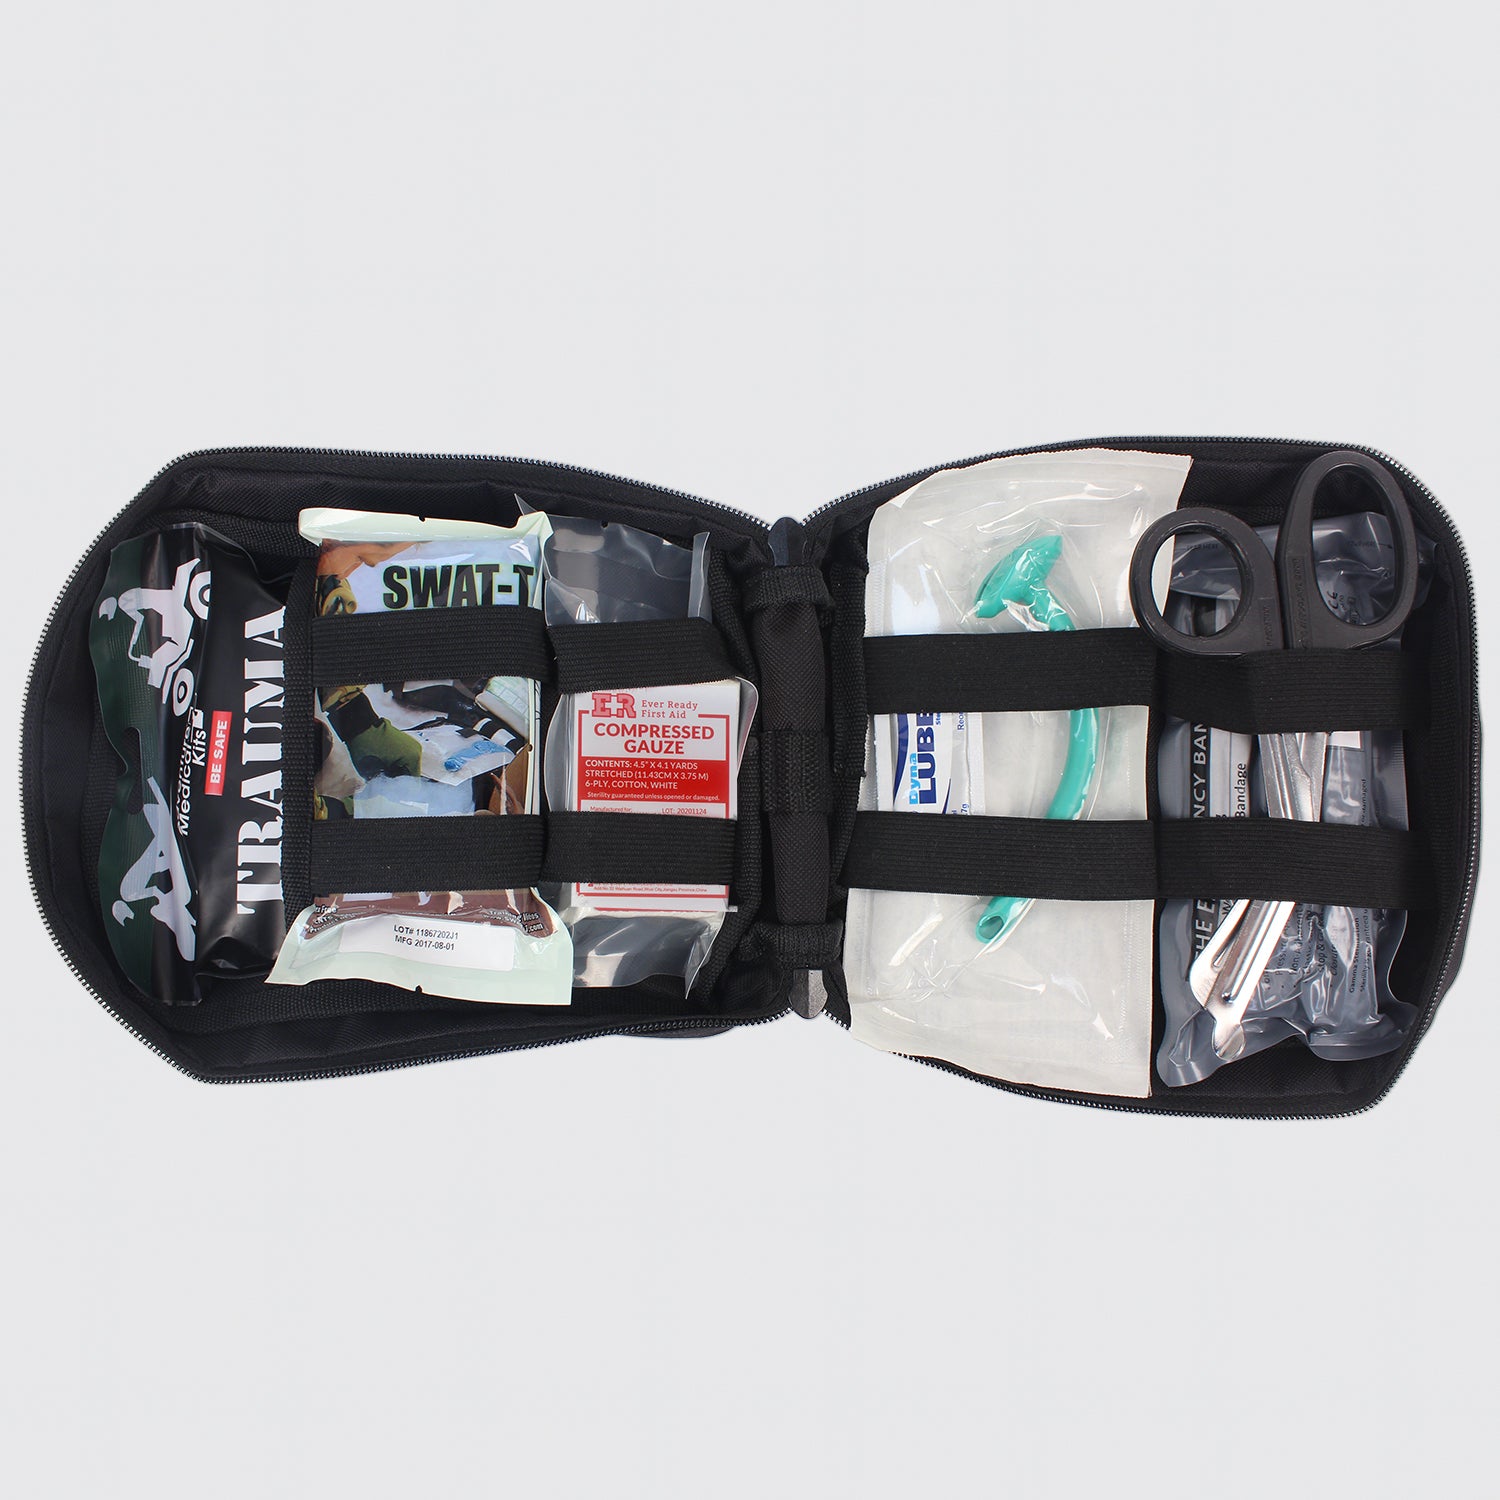 Ever Ready First Aid Tactical Trauma IFAK Kit Feat. Trauma Pack QuikClot, Israeli Bandage, SWAT-T Tourniquet in IFAK Molle Pouch